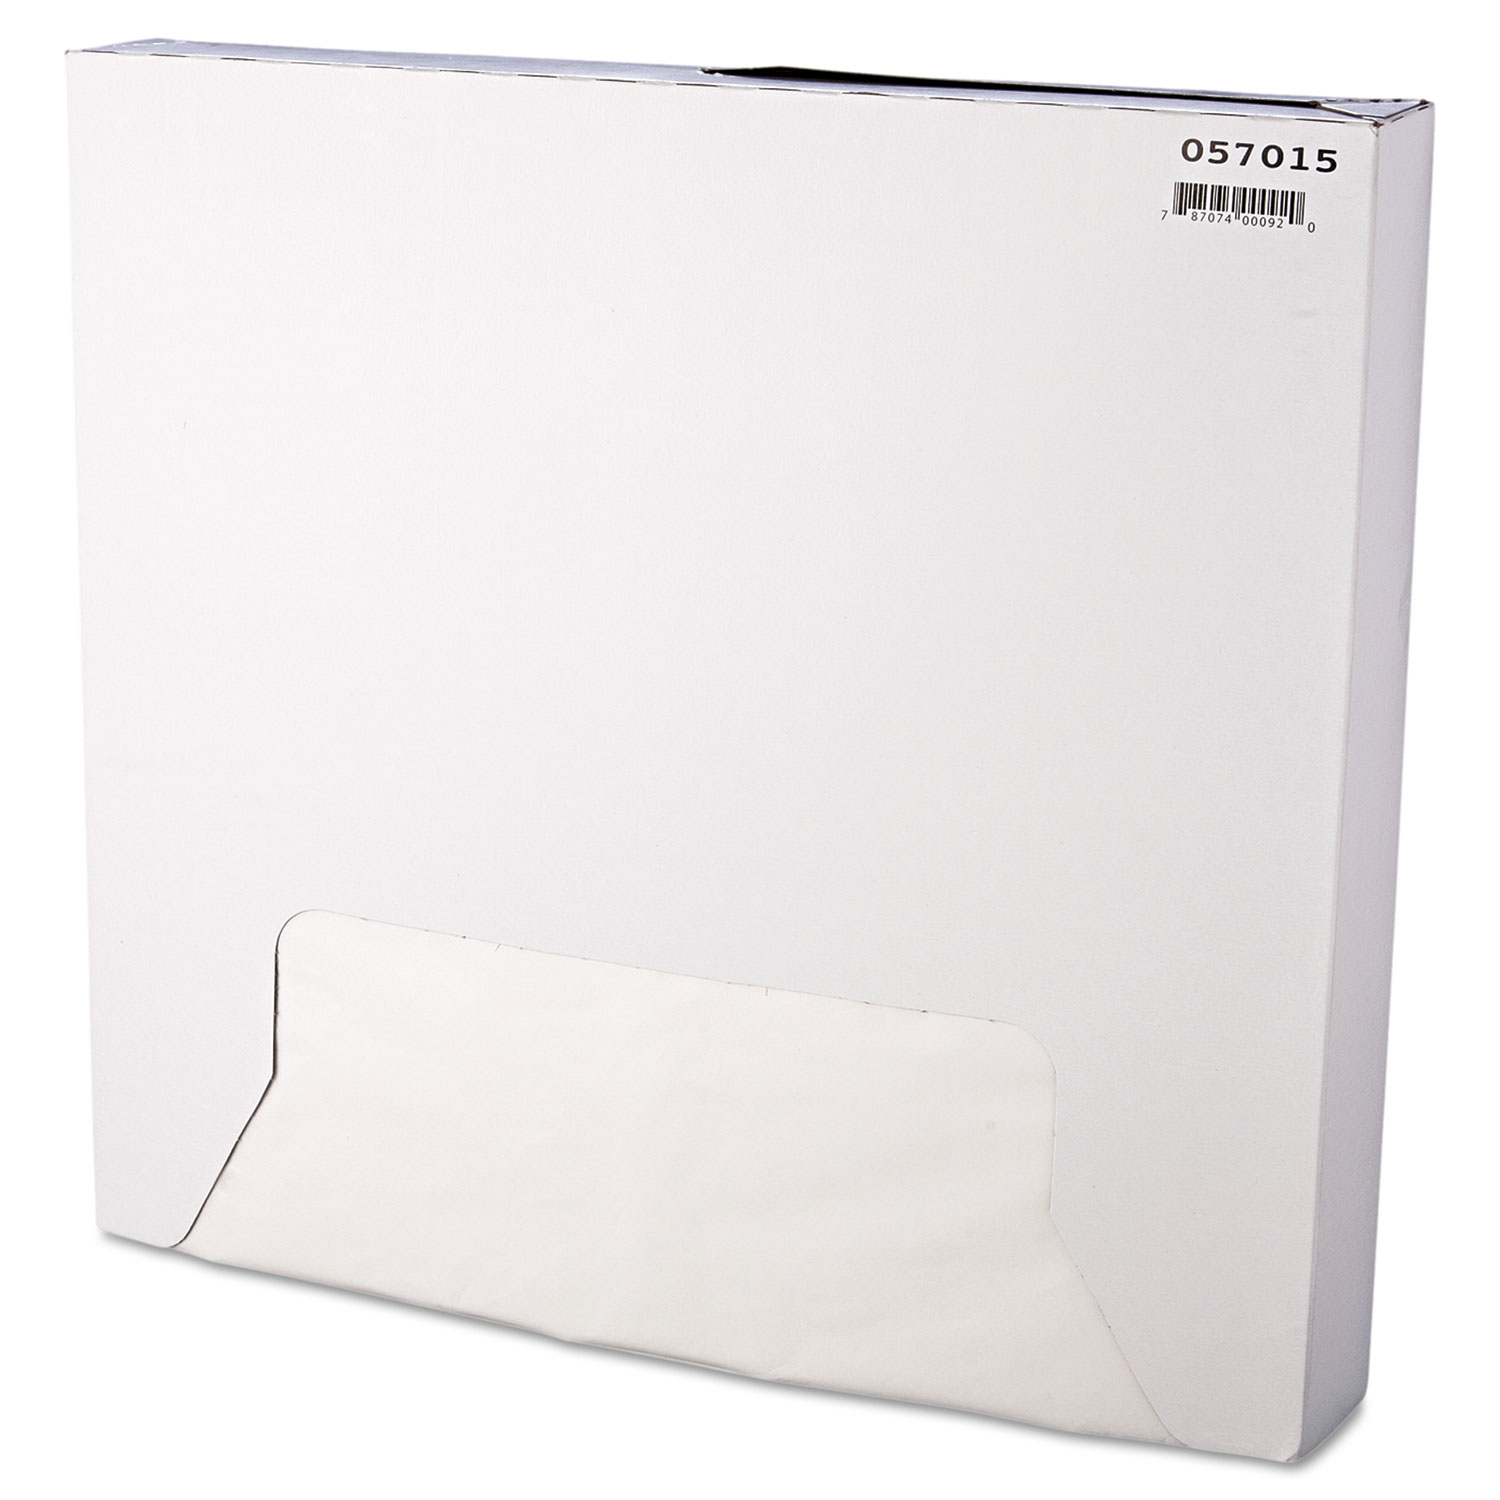  Bagcraft P057015 Grease-Resistant Paper Wraps and Liners, 15 x 16, White, 1000/Box, 3 Boxes/Carton (BGC057015) 